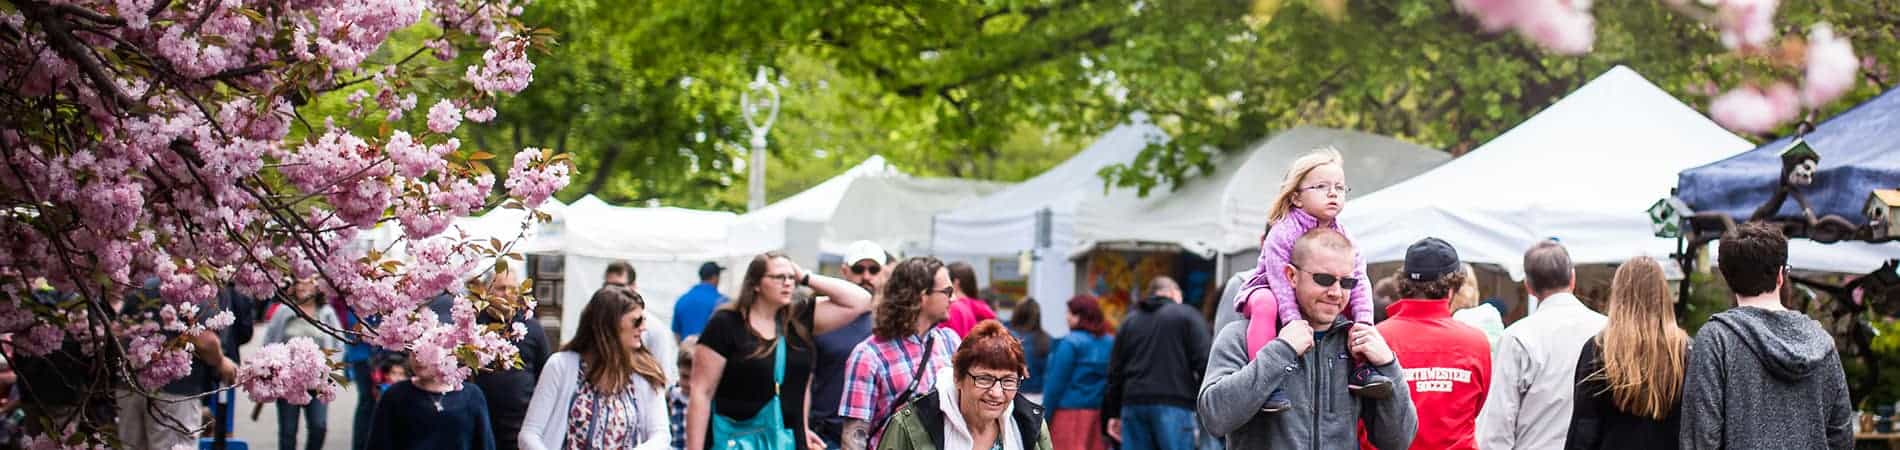 Art In The Park Application Rochester Events 2017